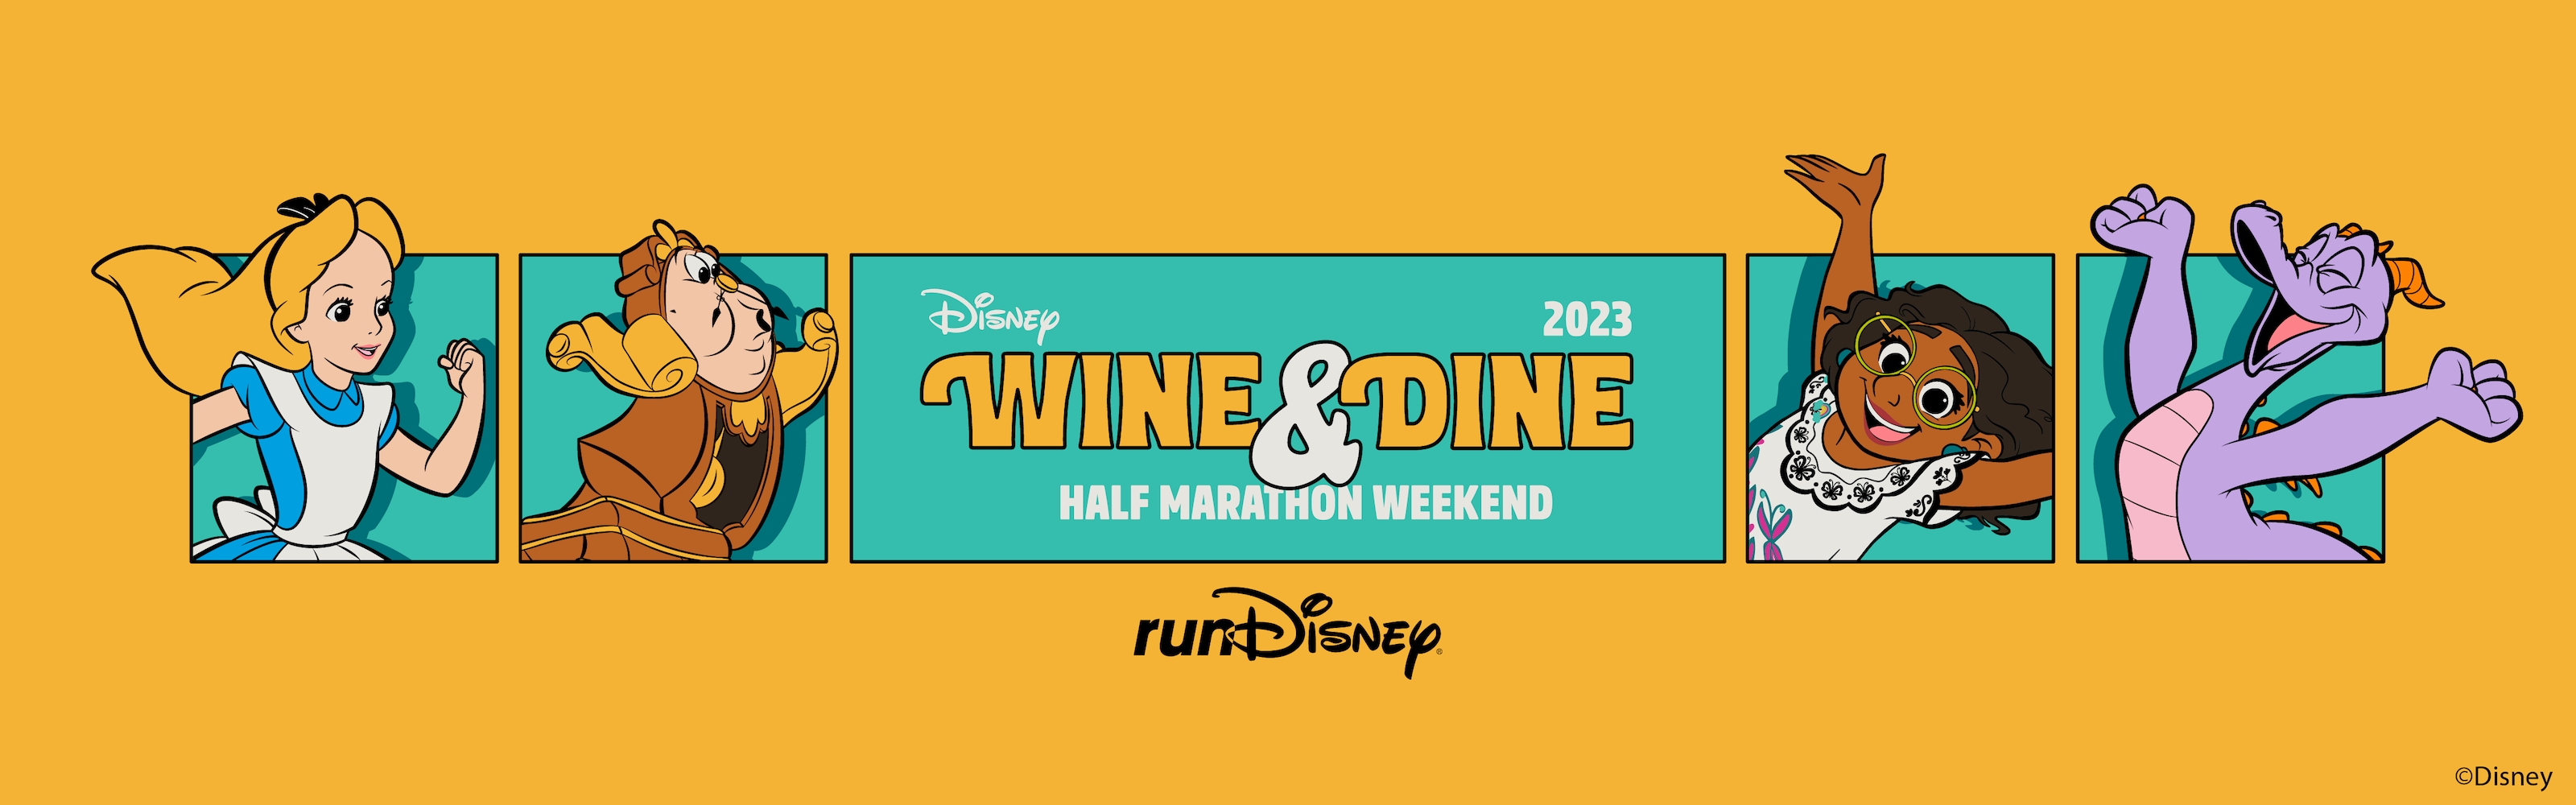 Logo for Disney Wine and Dine 2023 Half Marathon Weekend with the characters Alice from Alice in Wonderland, Cogsworth from Beauty and the Beast, Luisa from Encanto, and Figment from the Journey Into Imagination with Figment attraction at EPCOT.